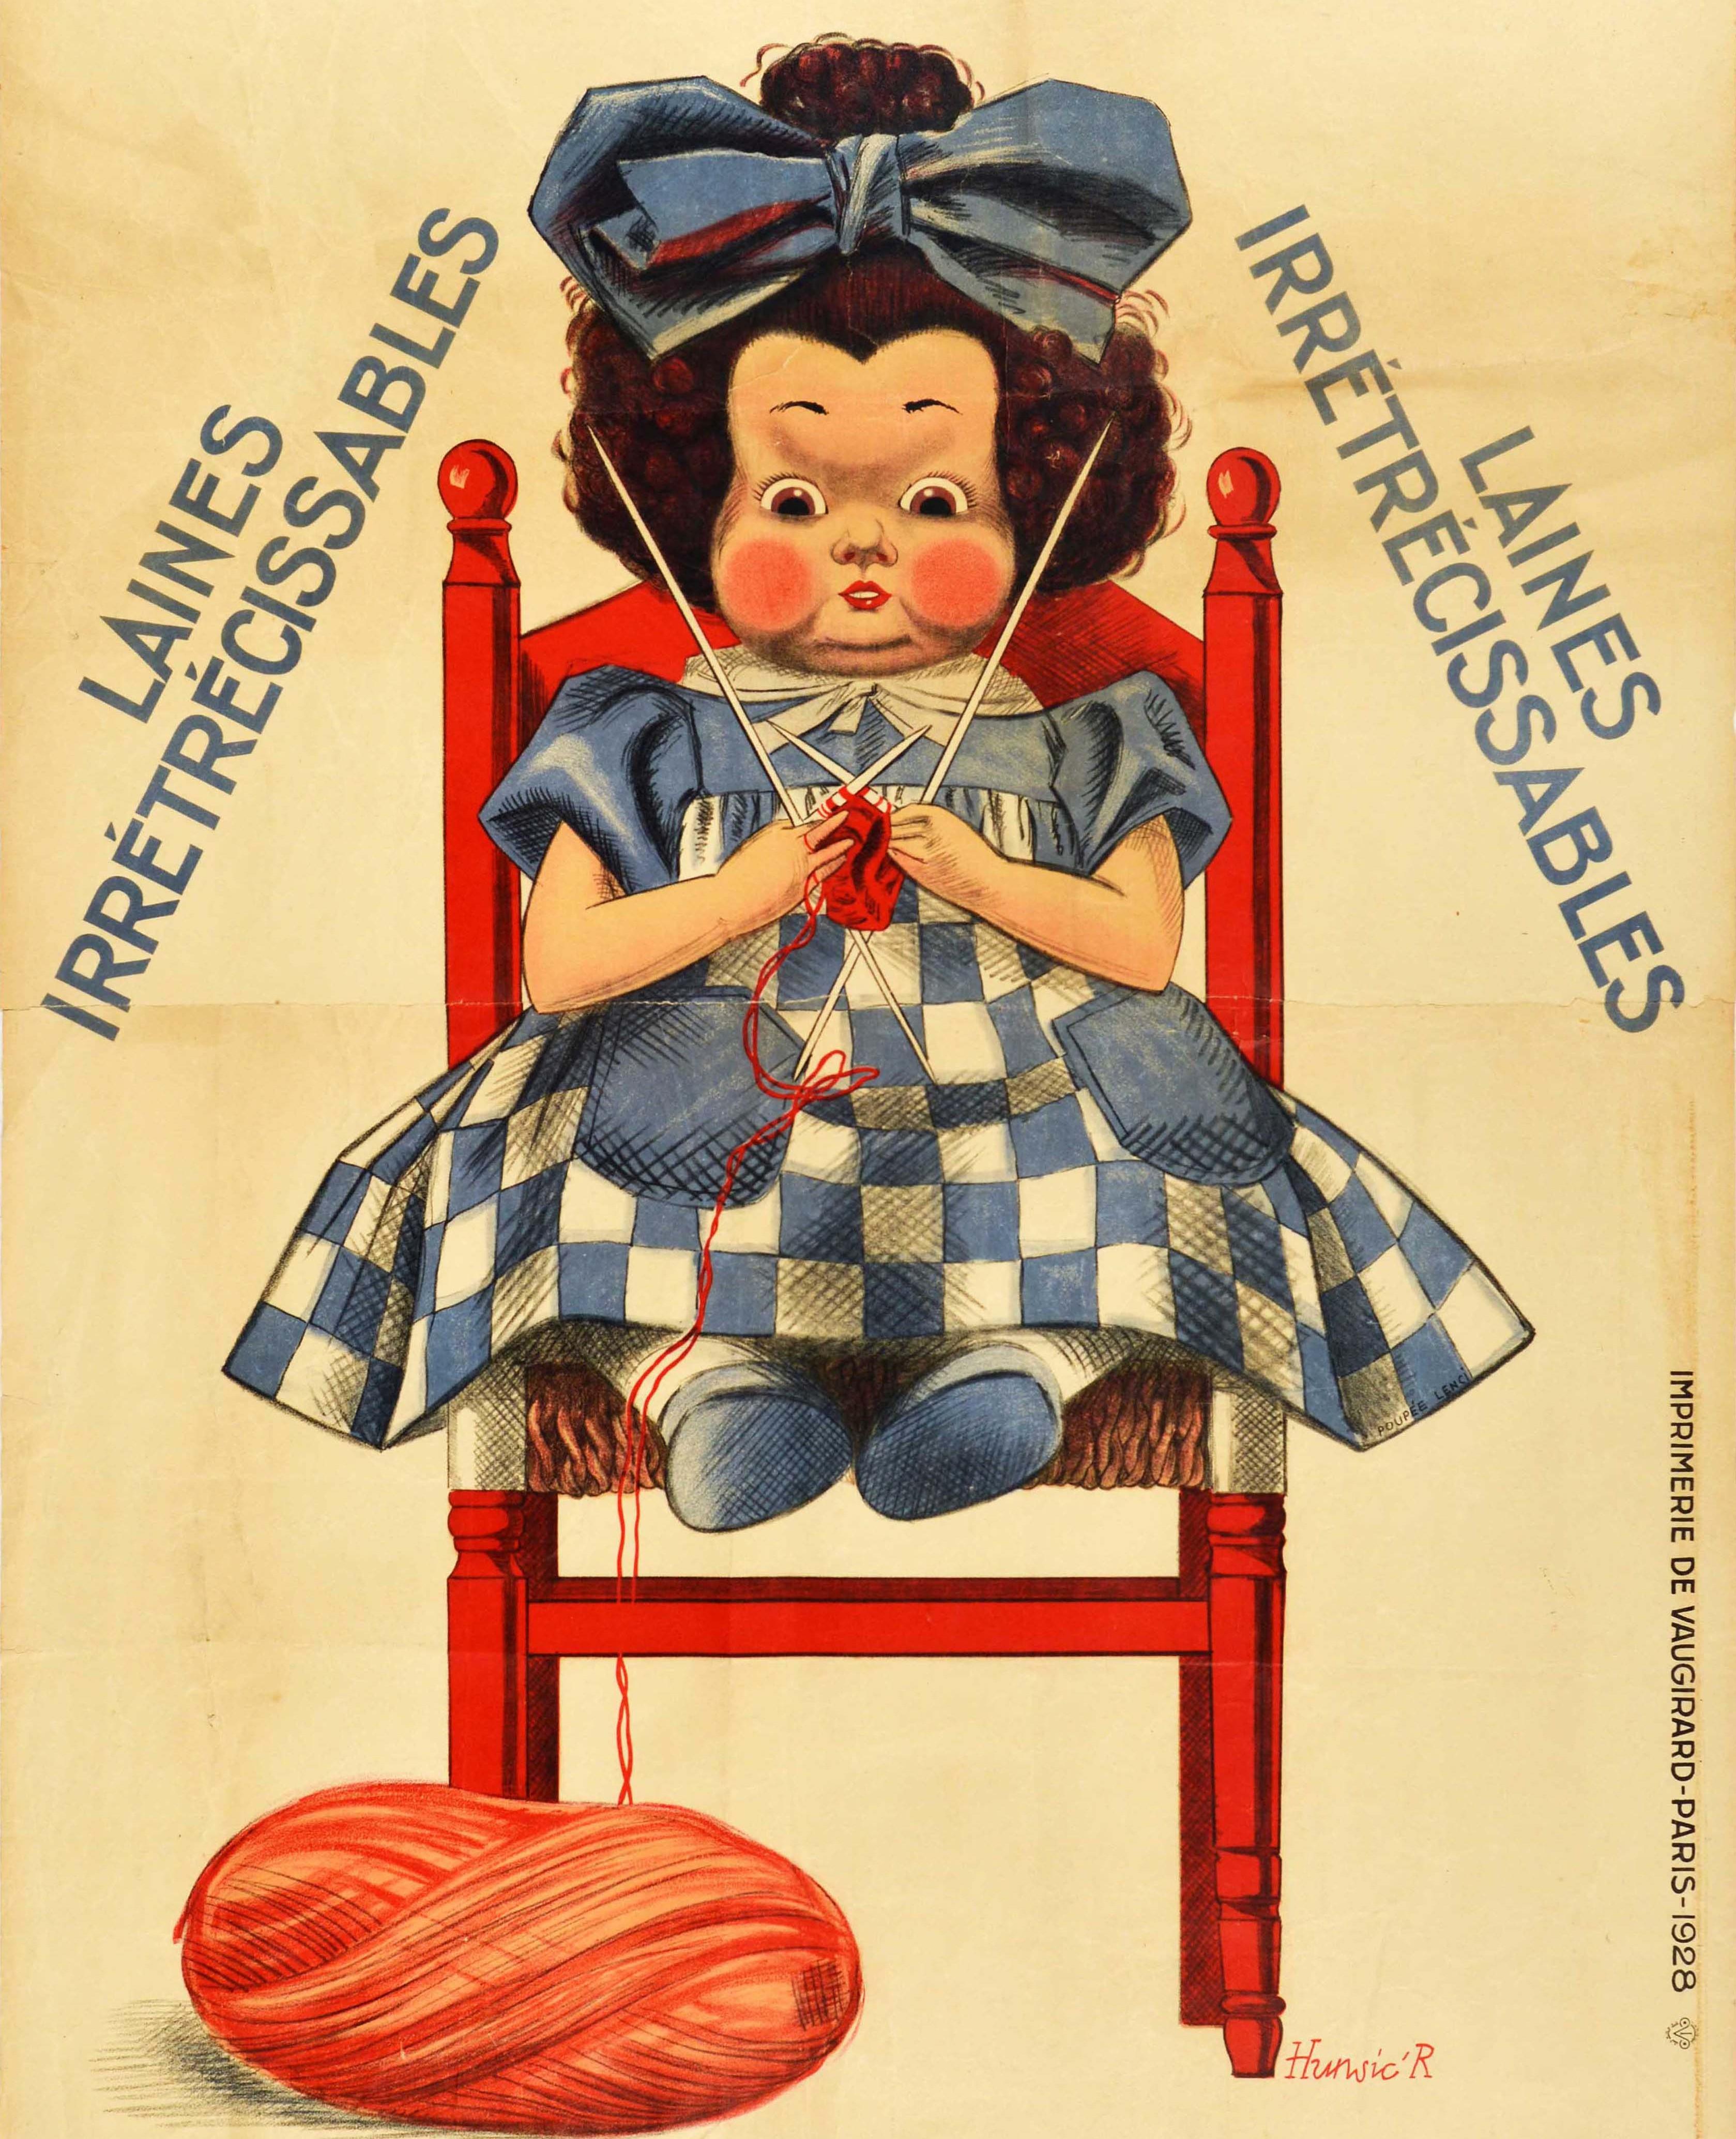 Original Vintage Poster Advertising Shrink Resistant Scottish Wool Knitting Doll In Fair Condition For Sale In London, GB